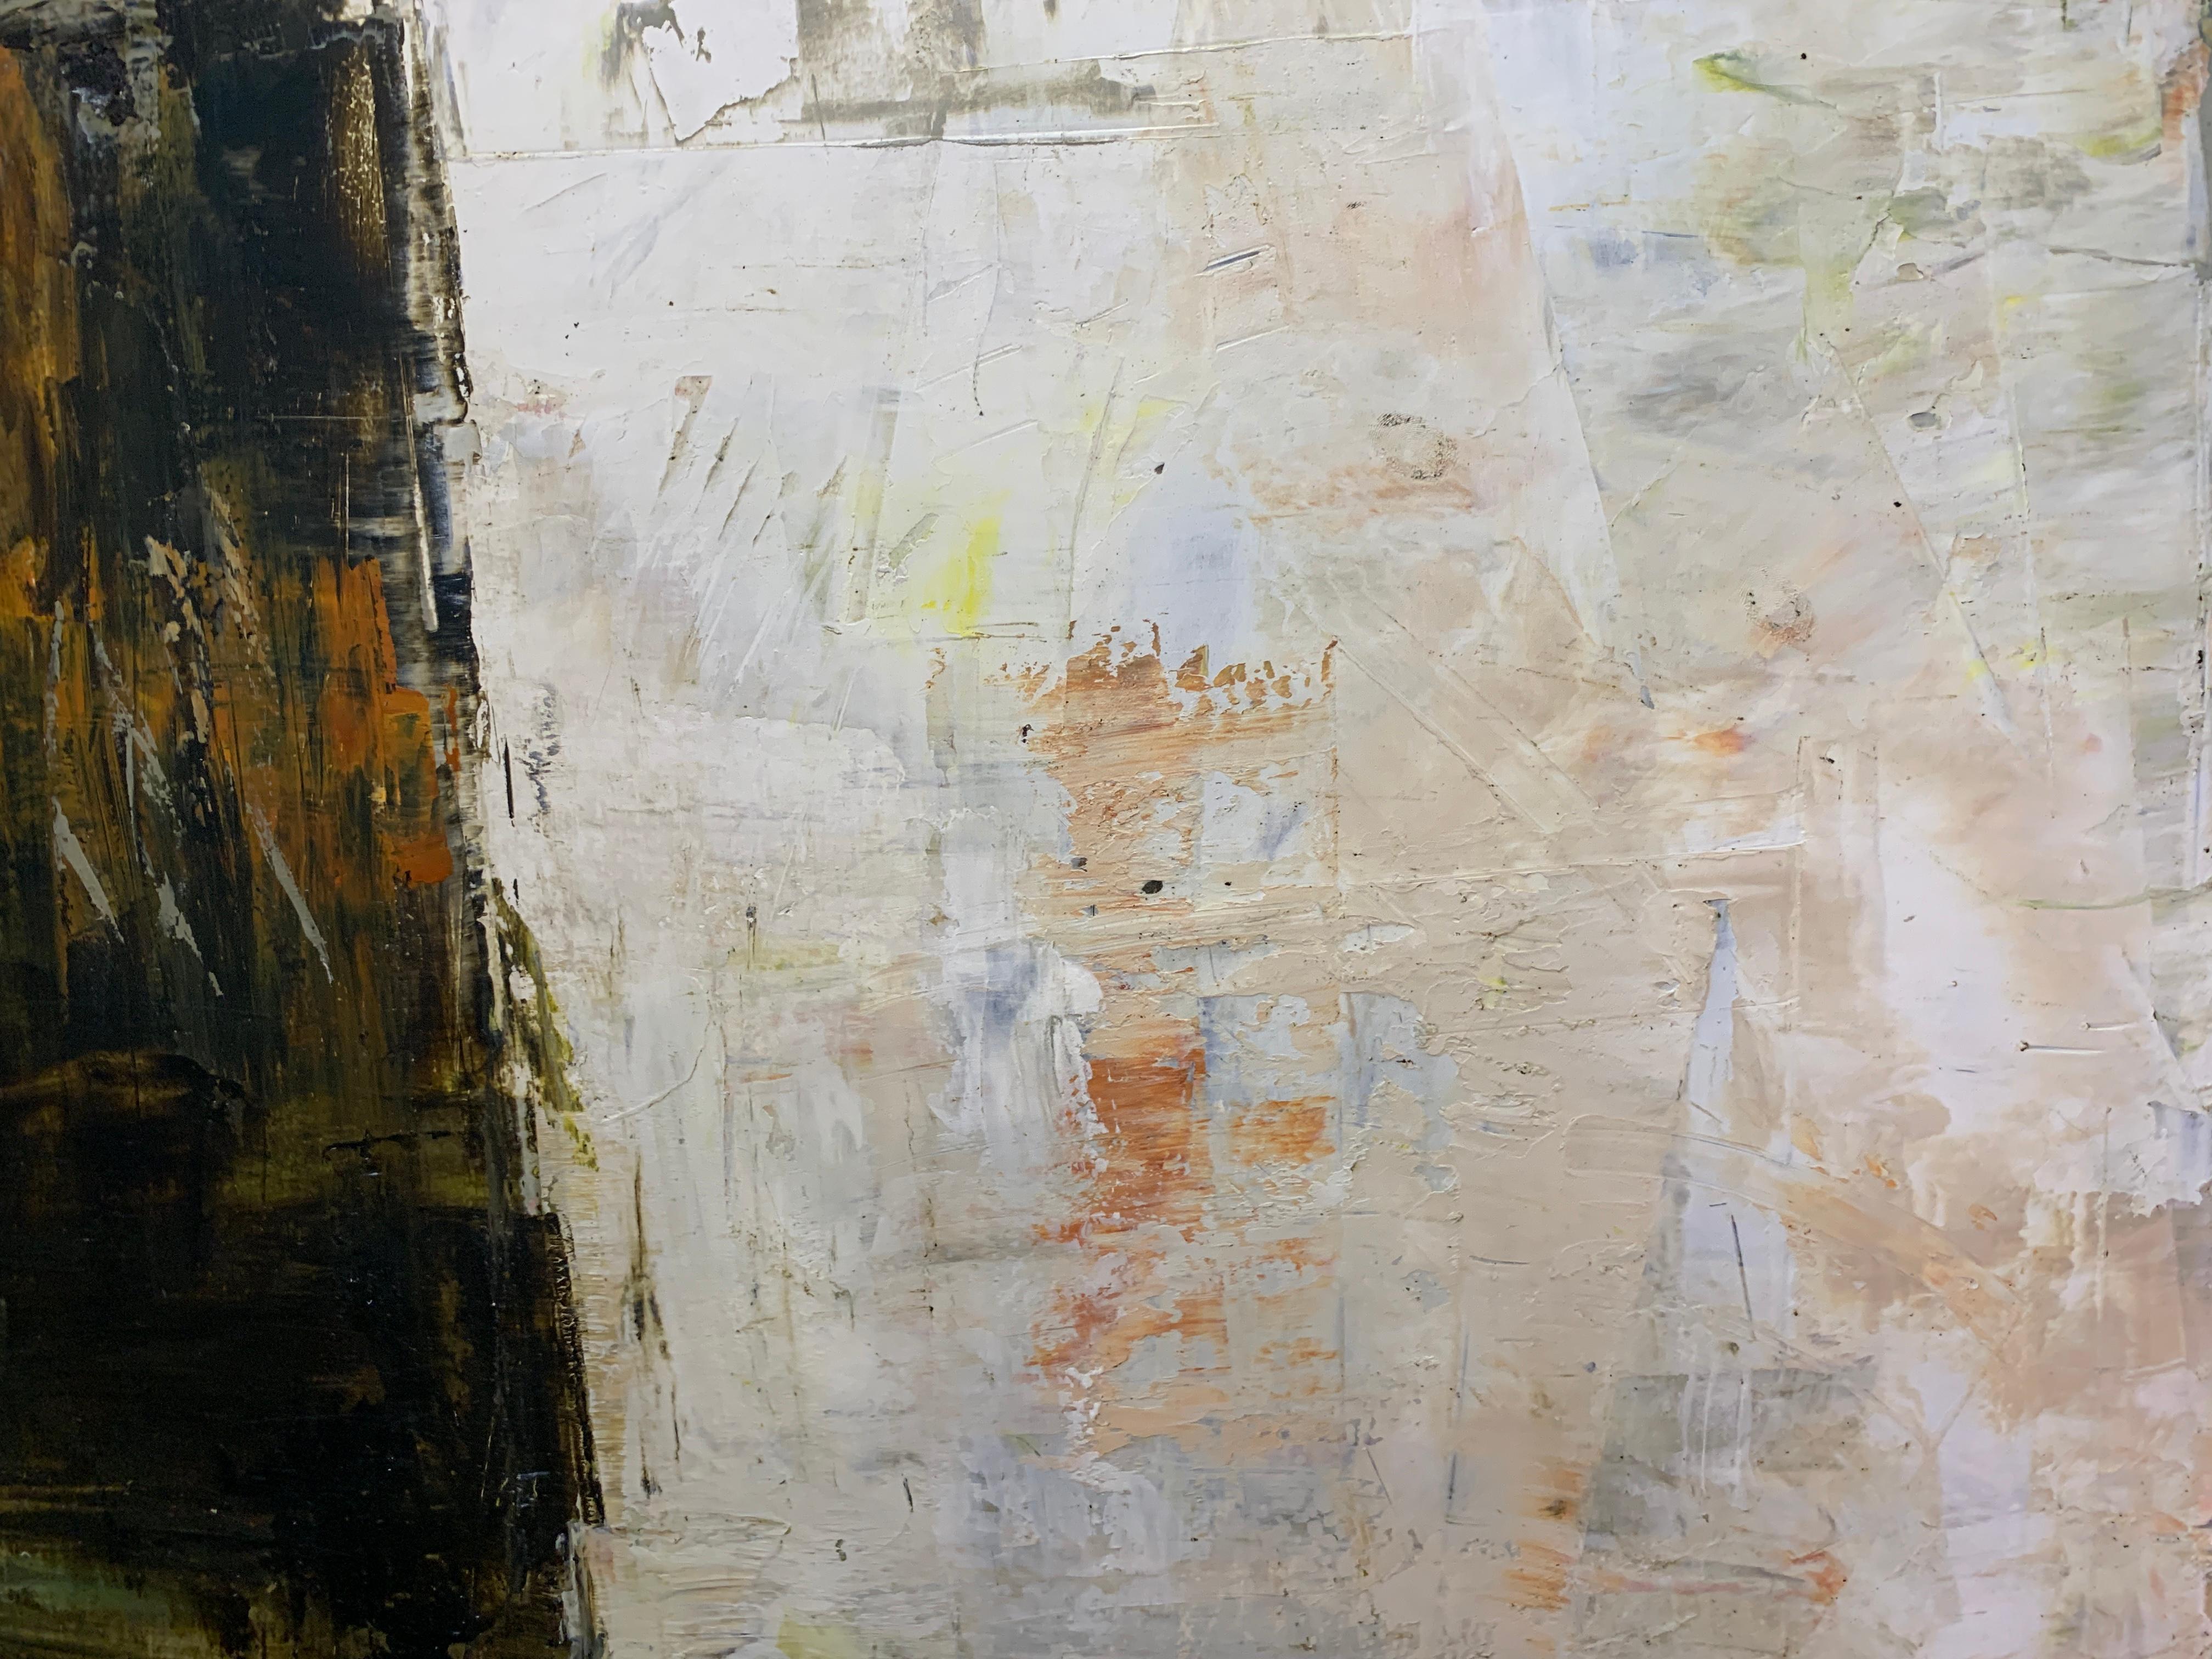 'Hello Gorgeous' is a large mixed media on board contemporary painting created by Amy Sullivan in 2019. It only took us a second to fall in love with Amy Sullivan's abstracted barns and structures. Oozing with texture and media, her large-scale and